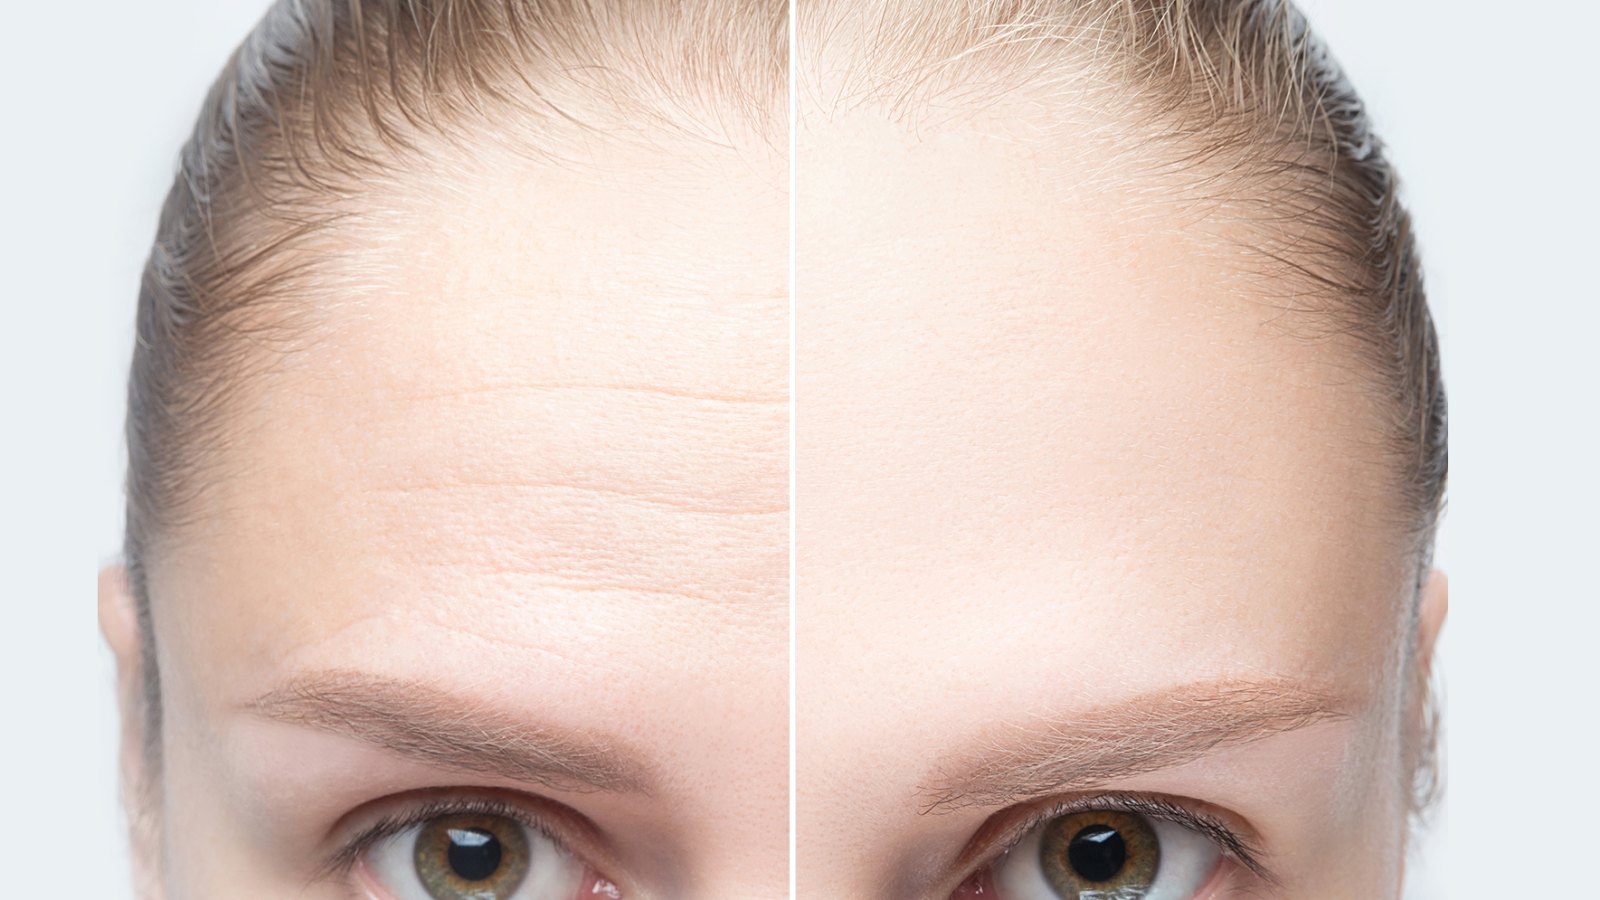 Forehead wrinkles before and after injection, treatment, surgery. Womans face close up.